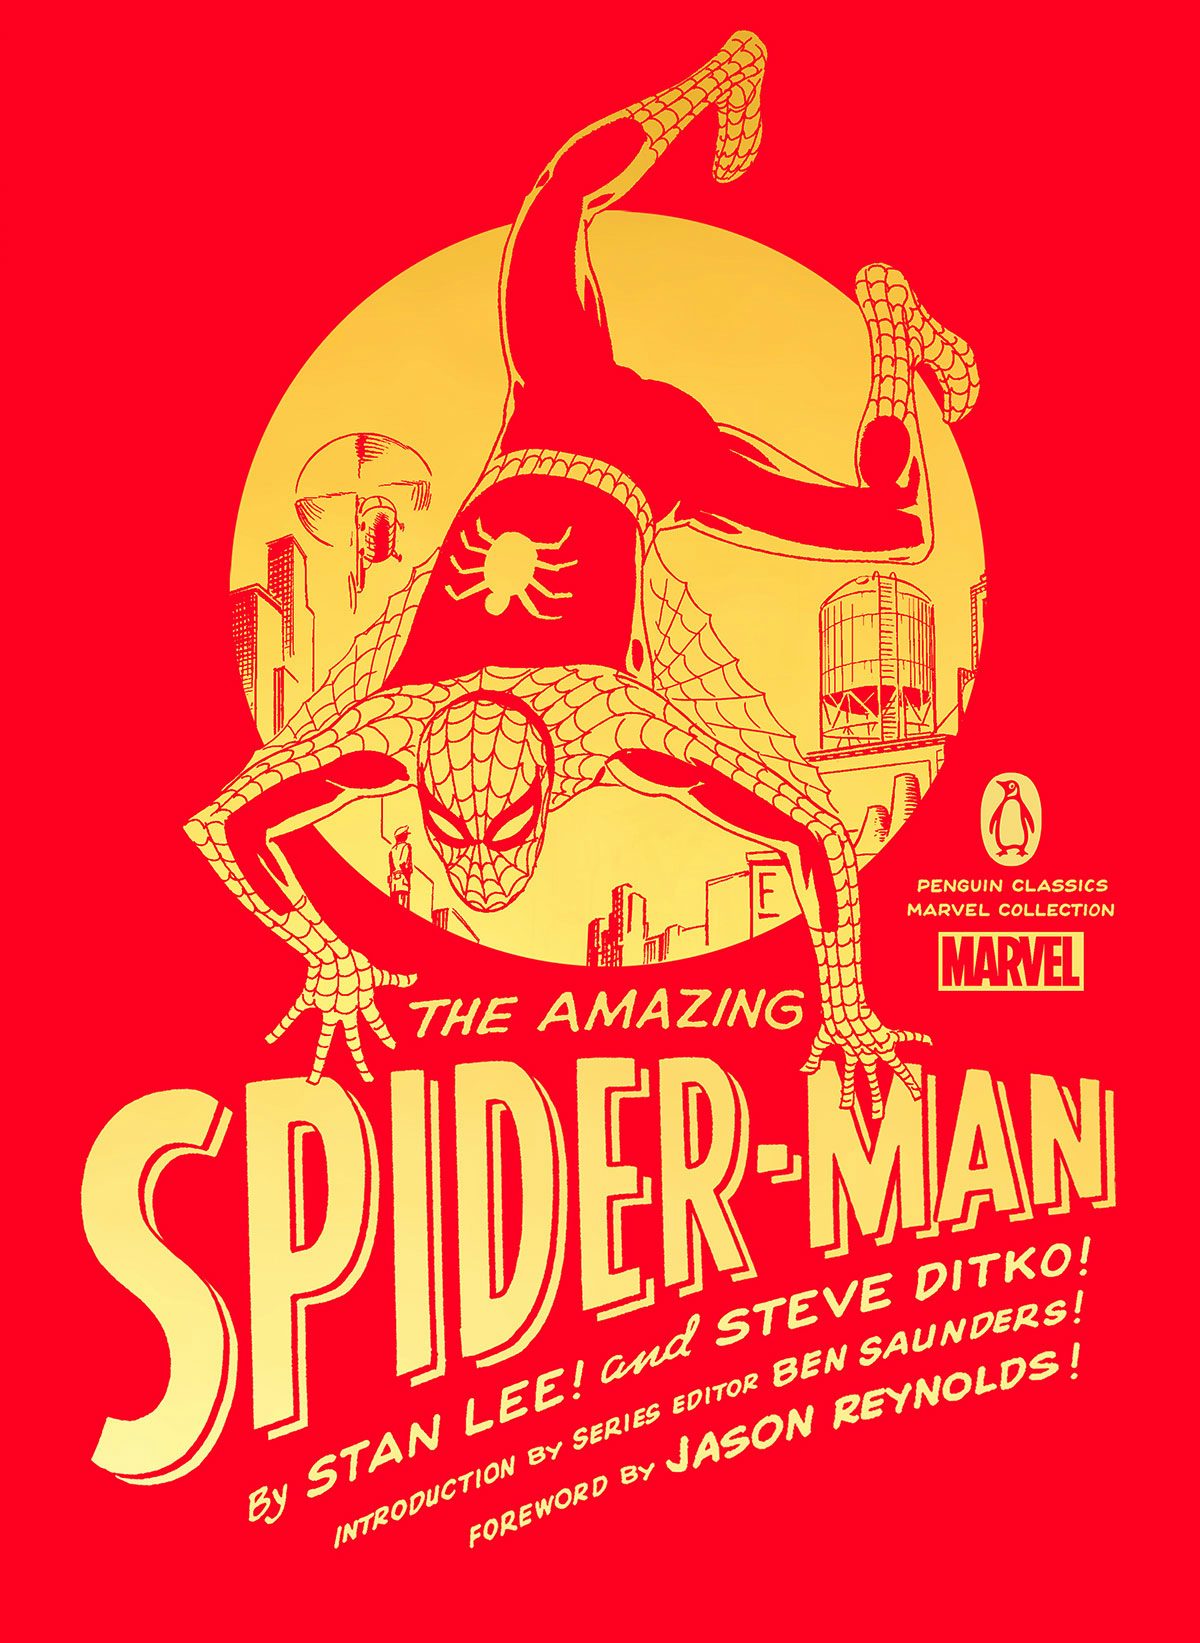 Penguin Marvel series cover featuring Spider-Man